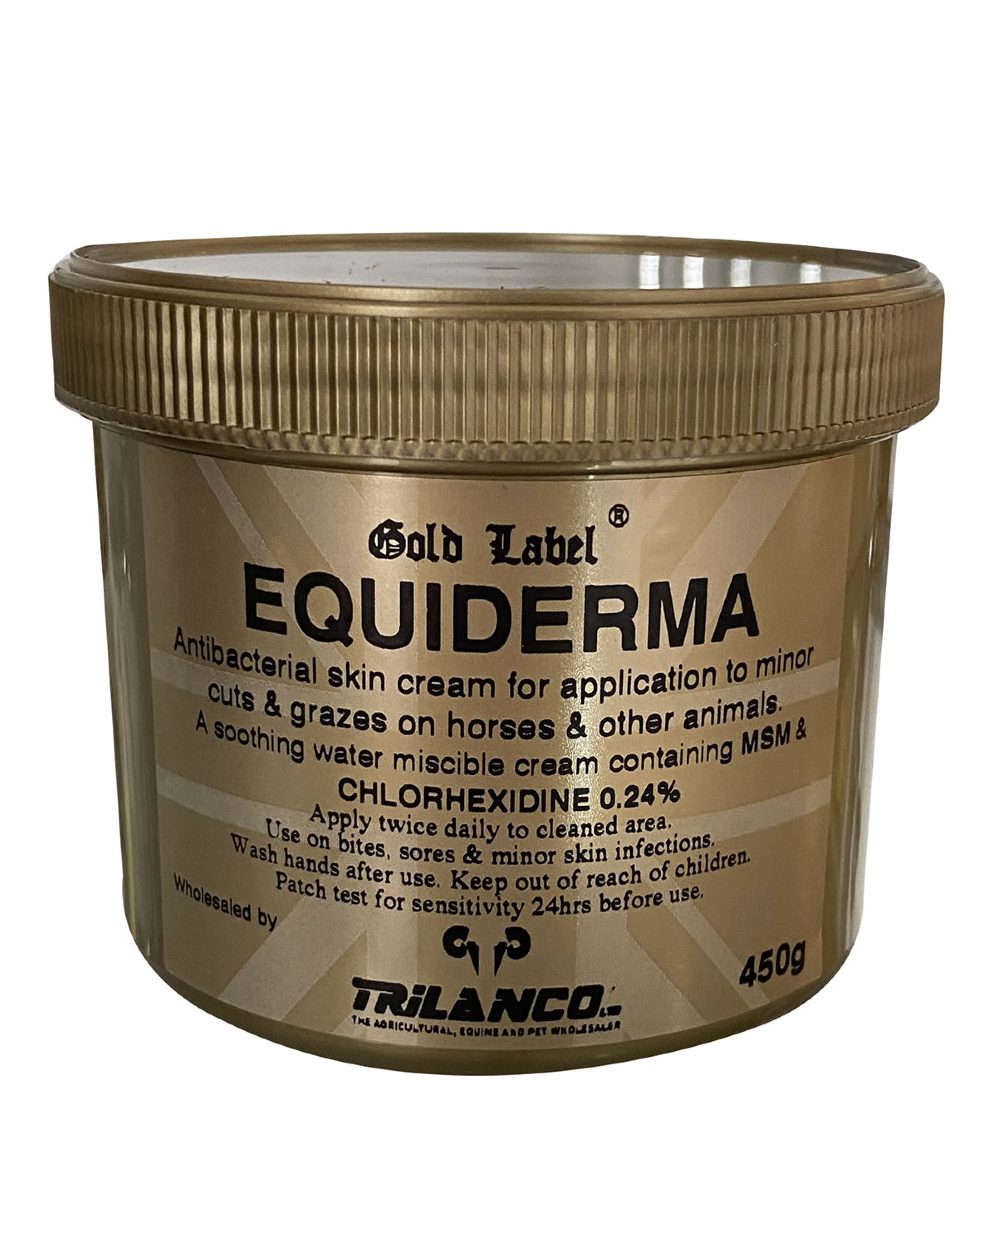 Gold Label Equiderma On A White Background